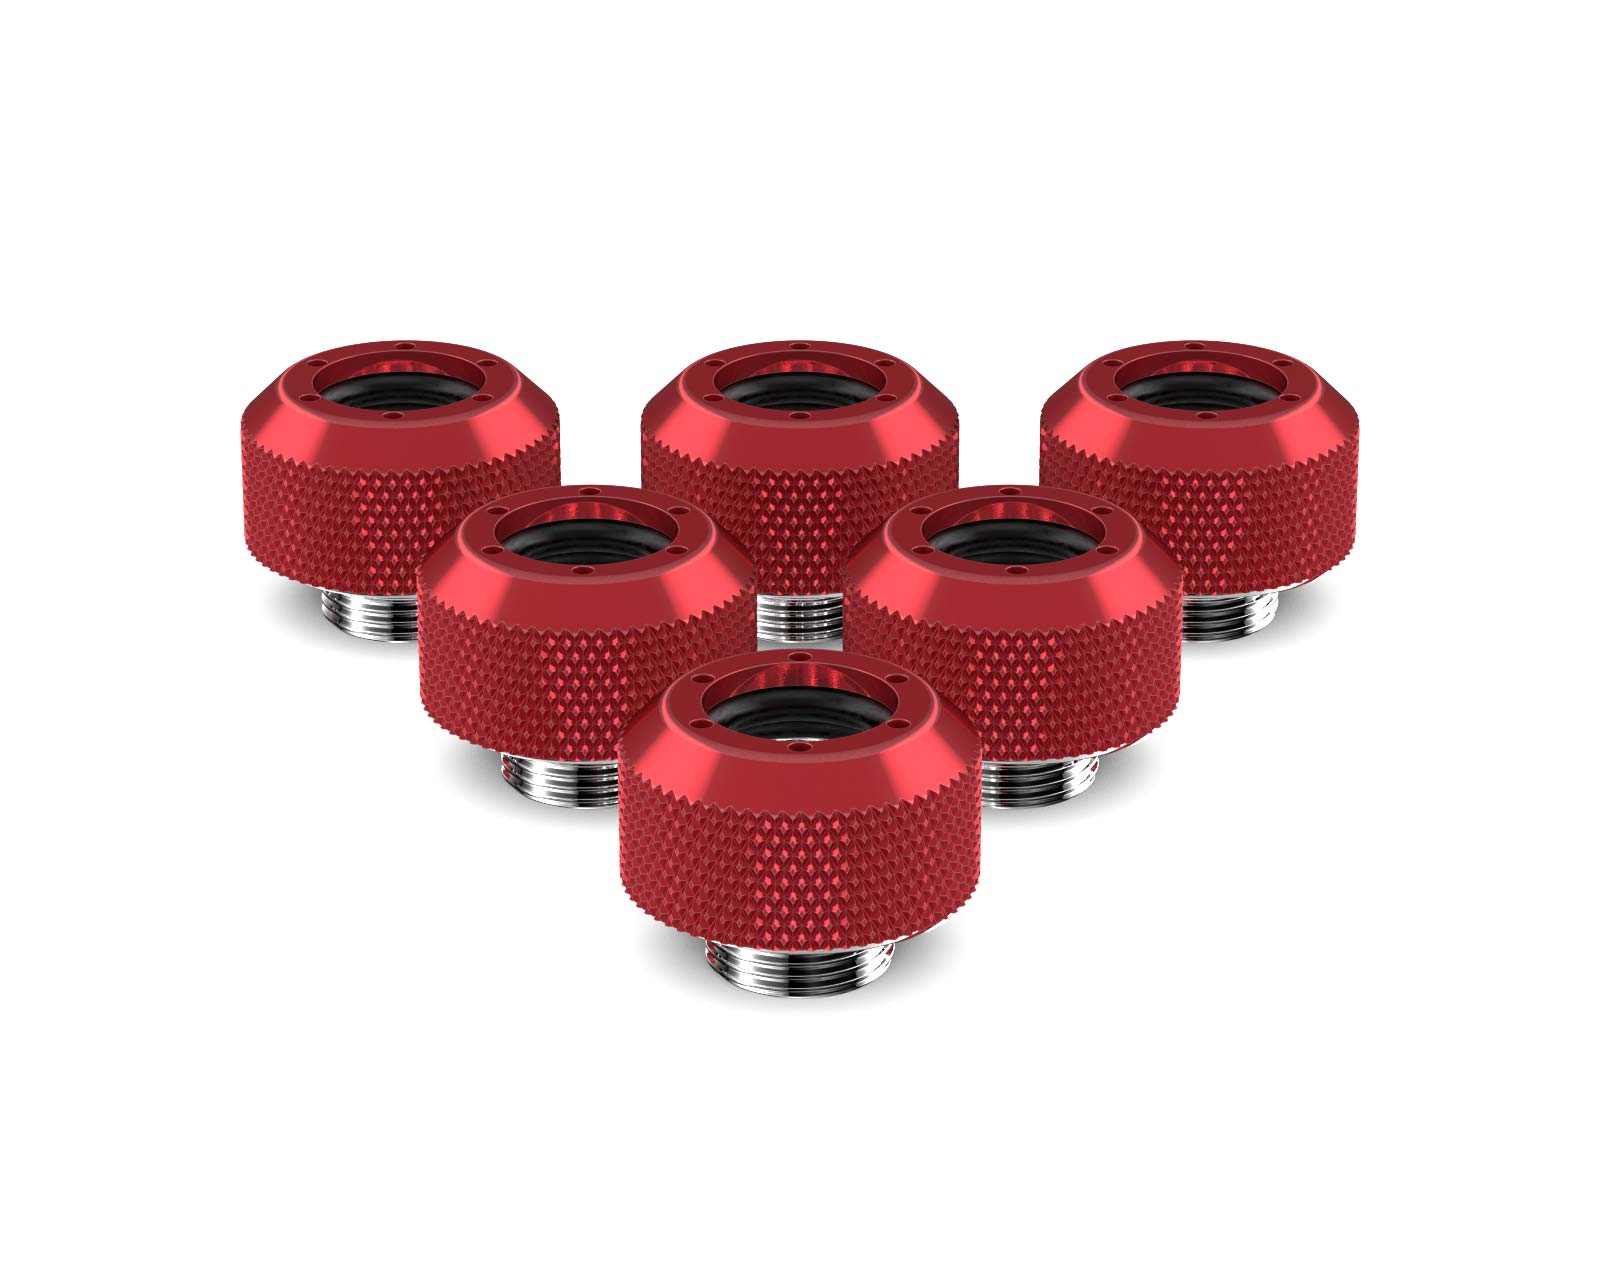 PrimoChill 1/2in. Rigid RevolverSX Series Fitting - 6 pack - PrimoChill - KEEPING IT COOL Candy Red